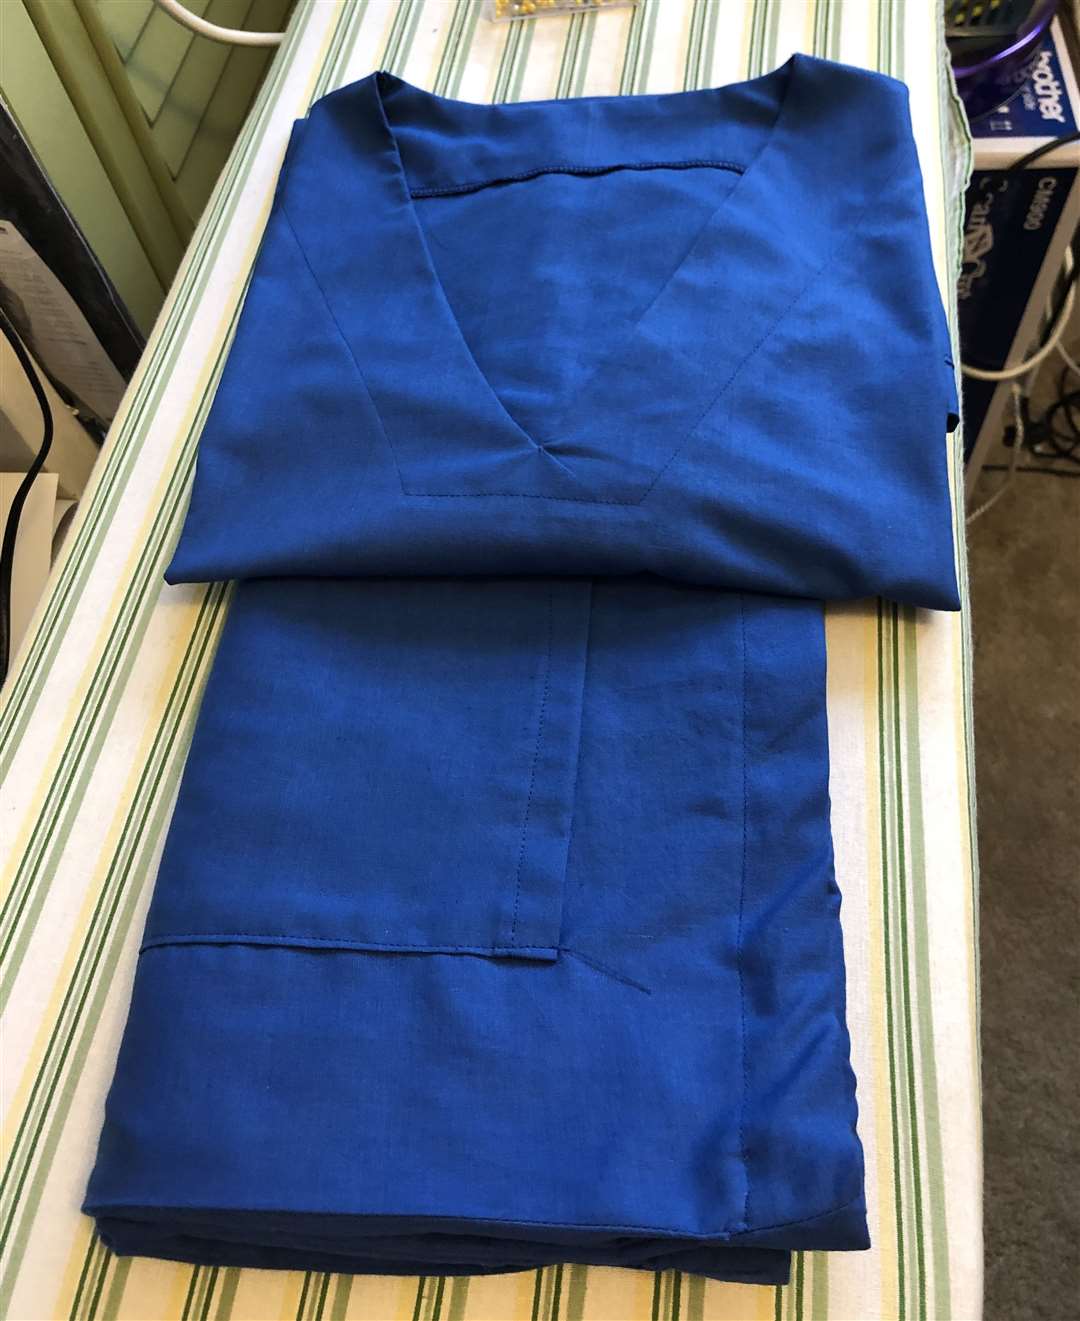 A completed set of scrubs which will be donated to a nearby hospital